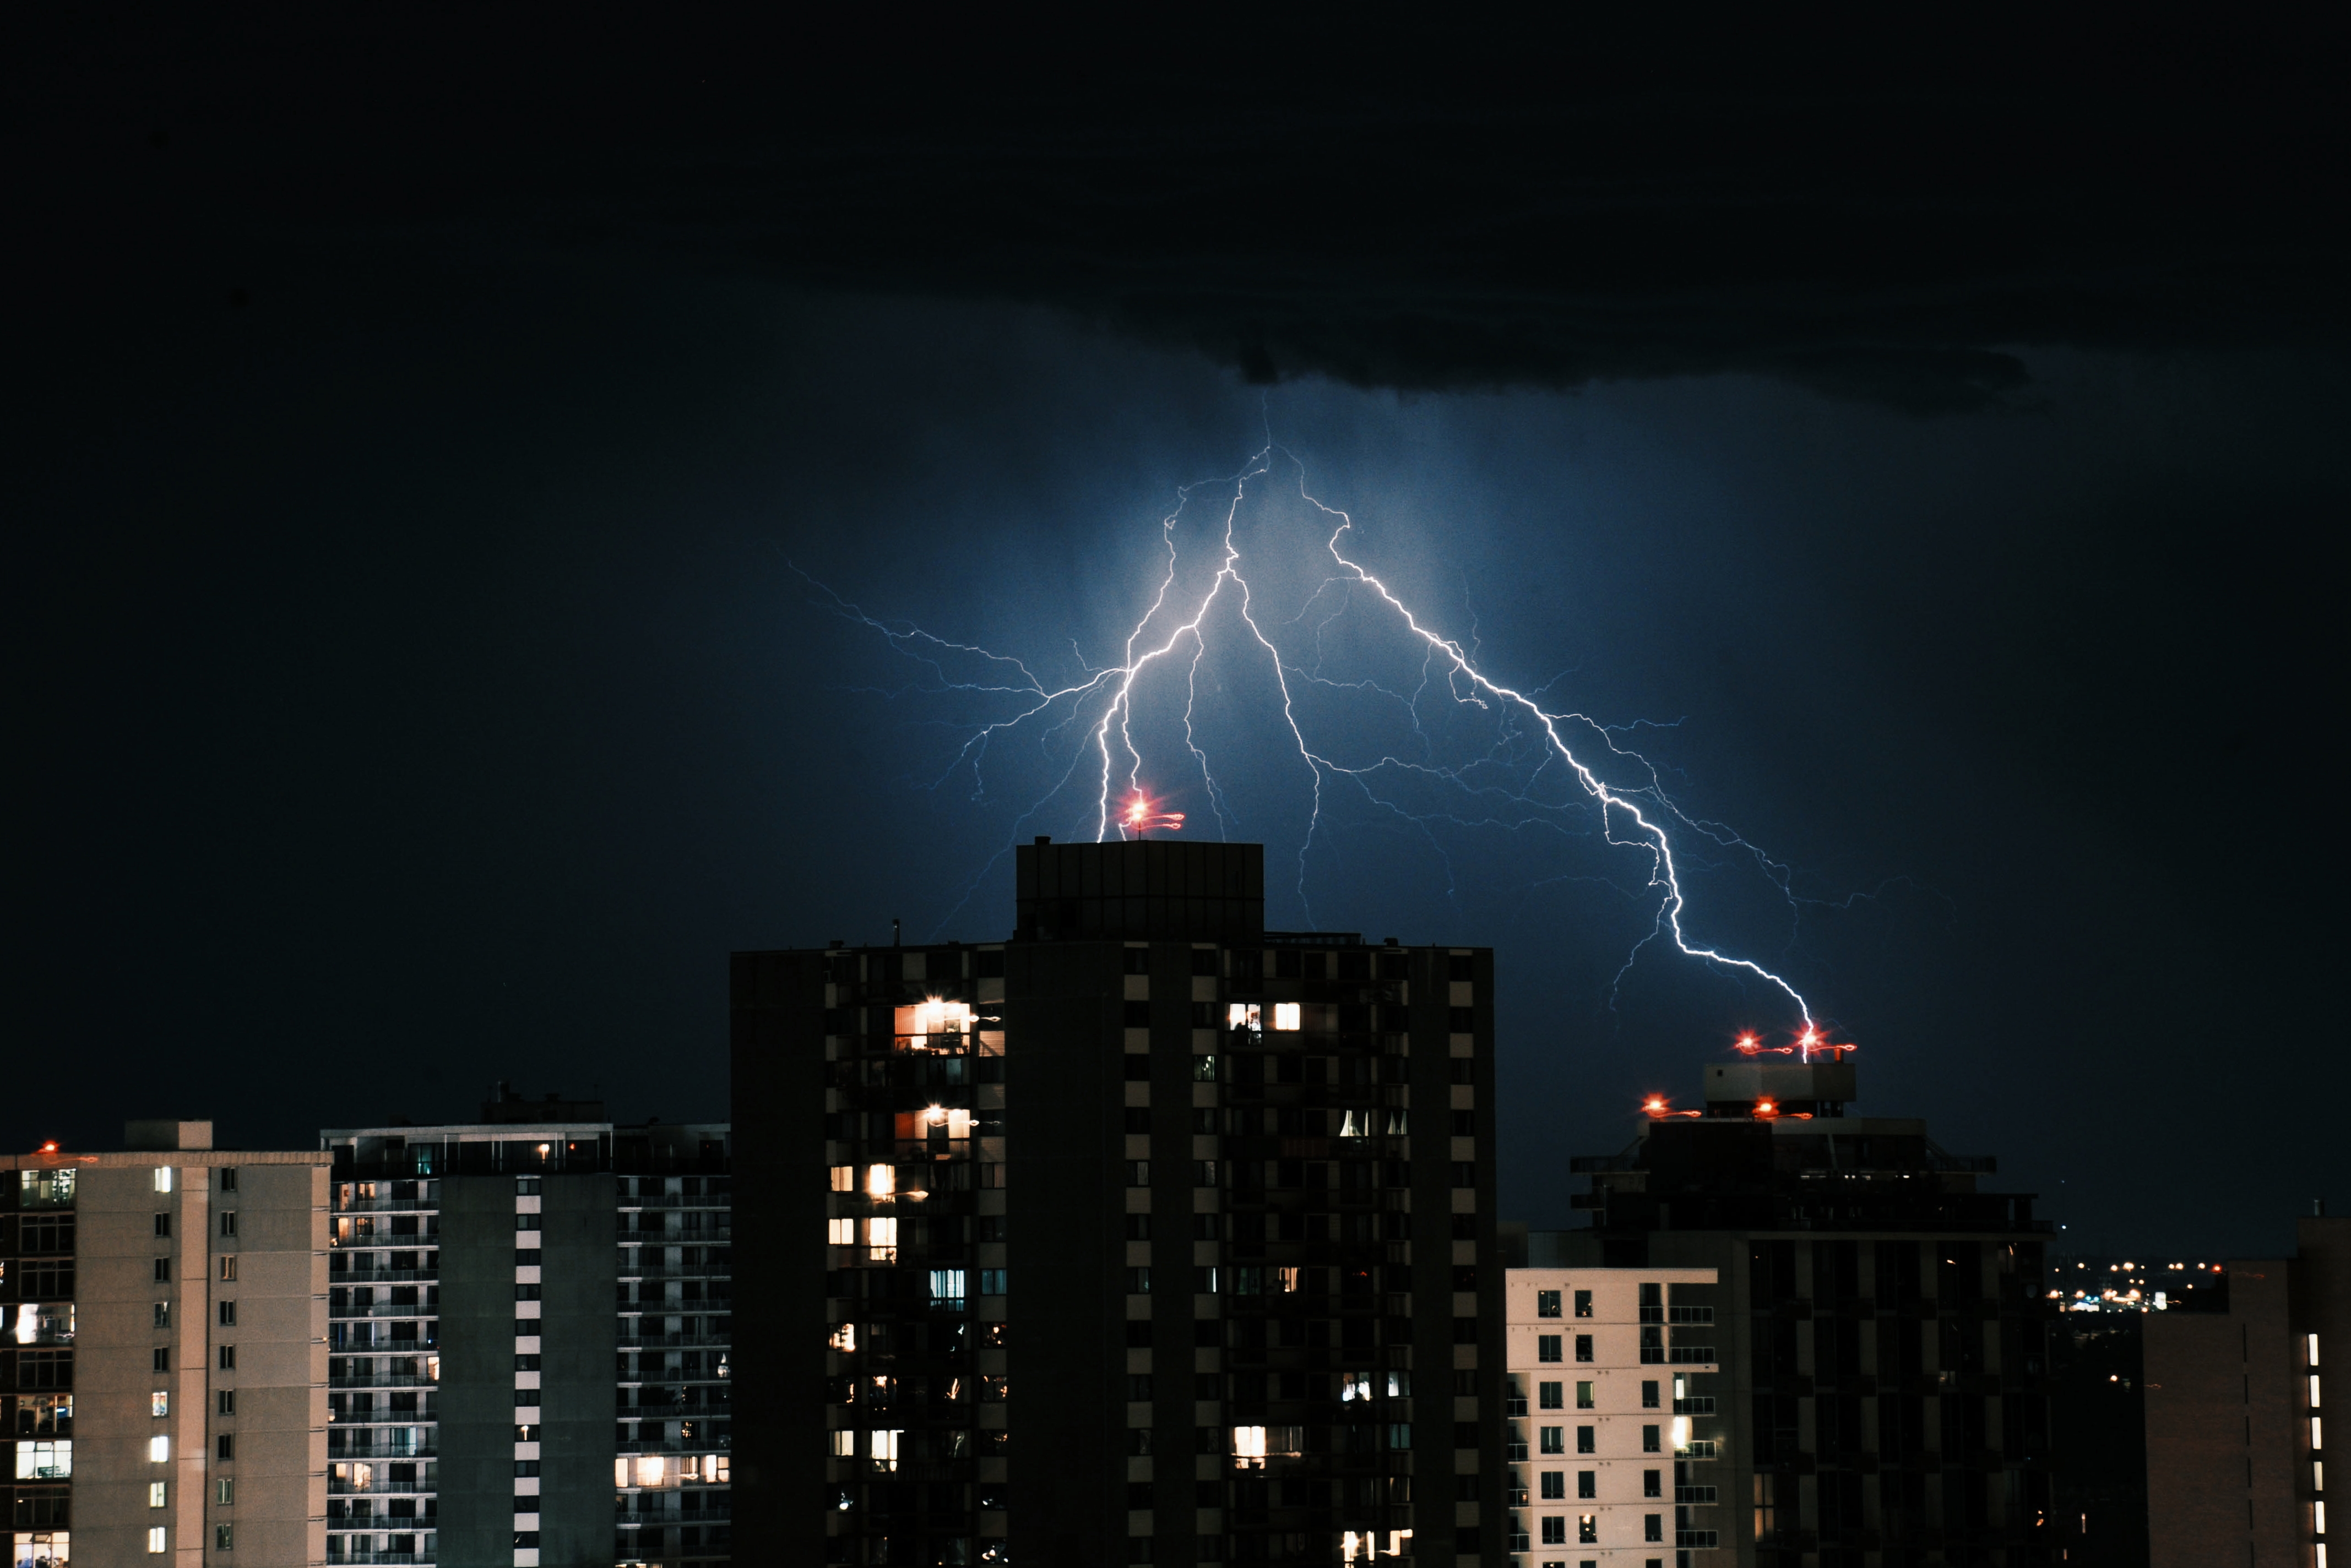 Lightning in the dark sky over the buildings in the city at night